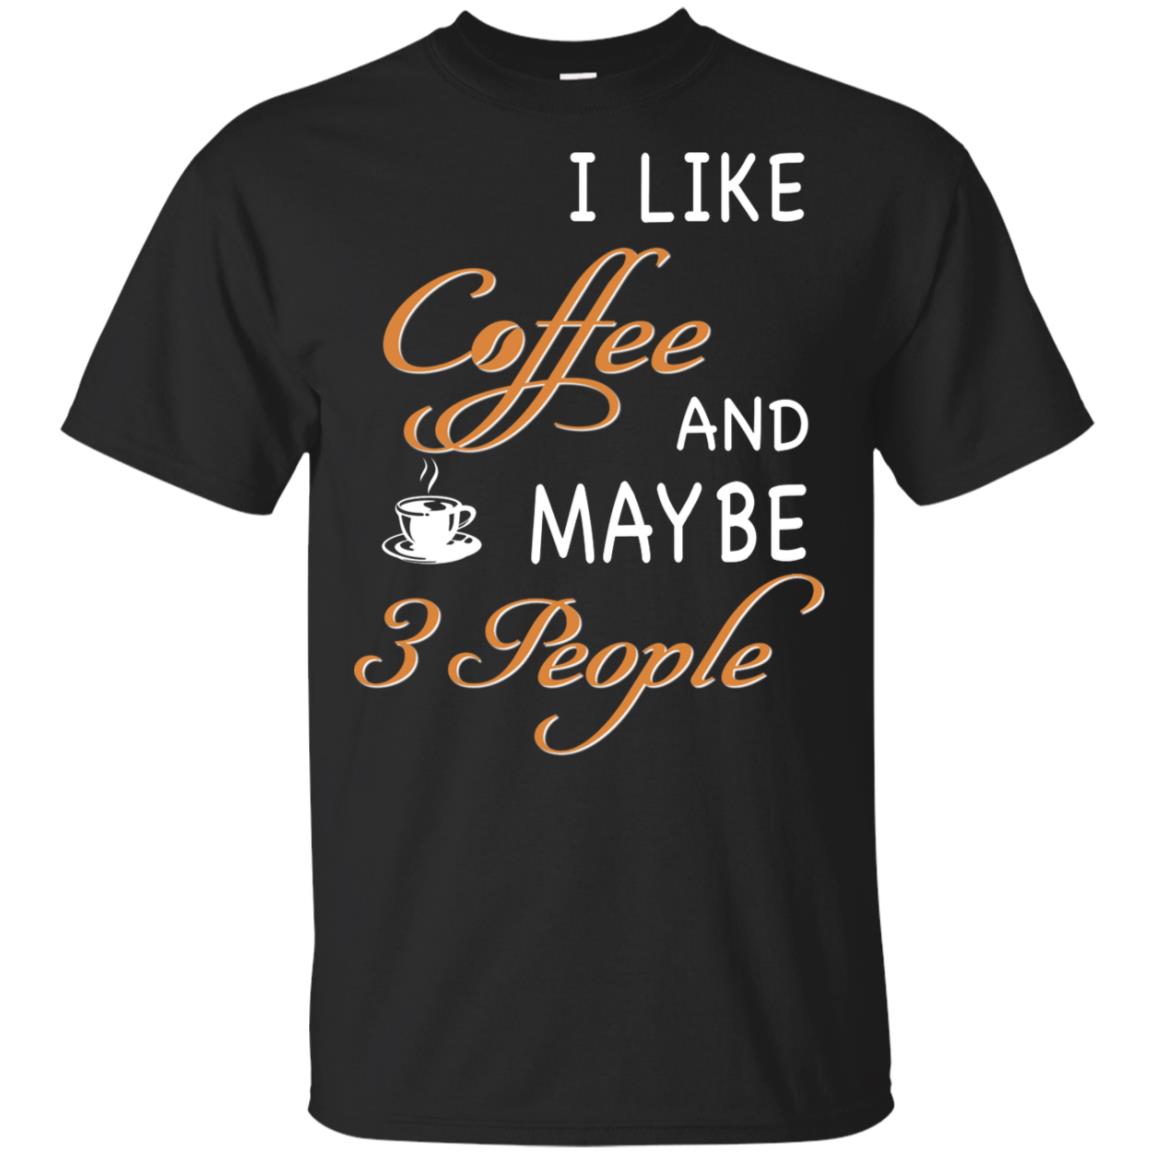 I Like Coffee And Maybe 3 People T-Shirt – DovePrints